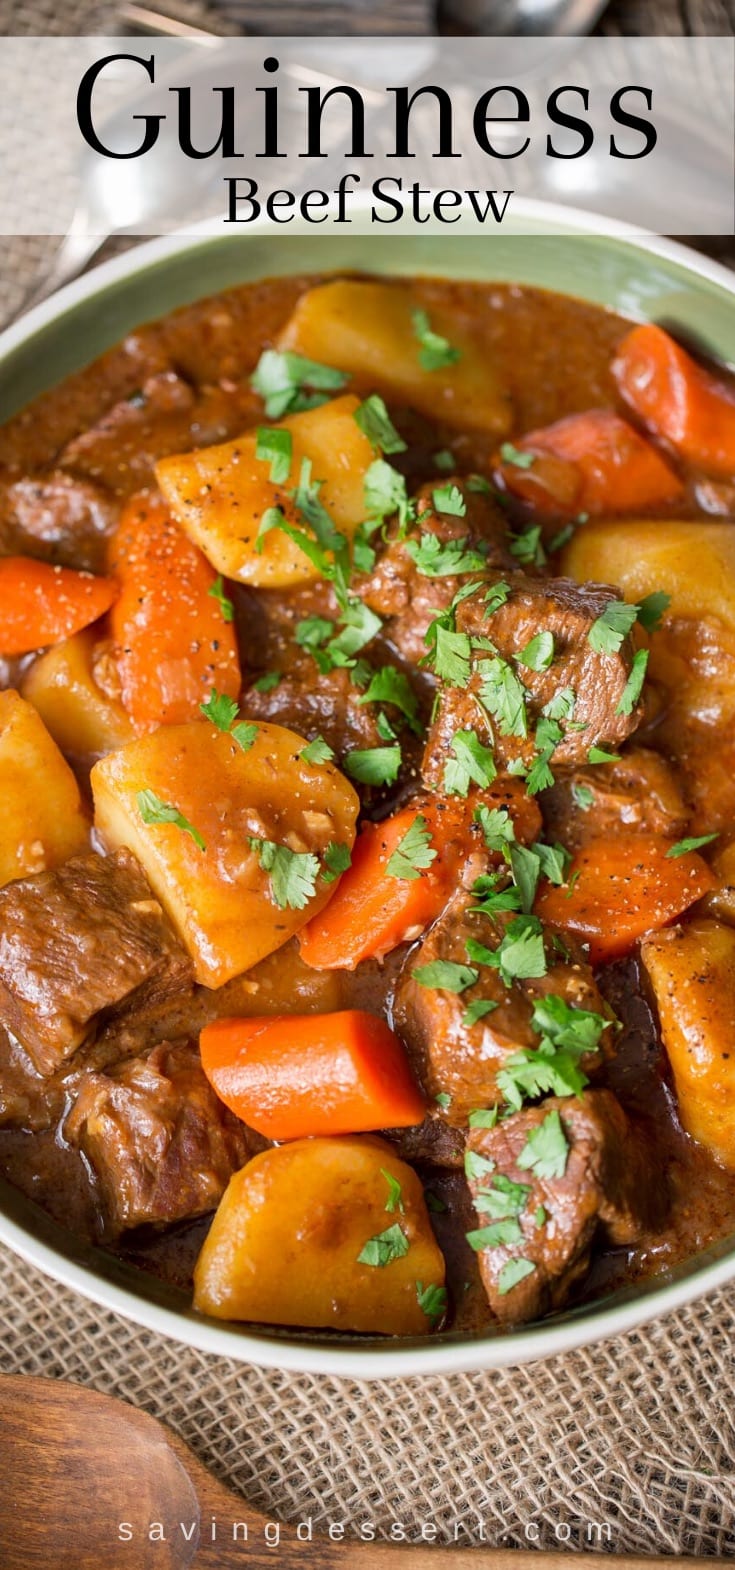 A bowl of Guinness Beef Stew with carrots and potatoes